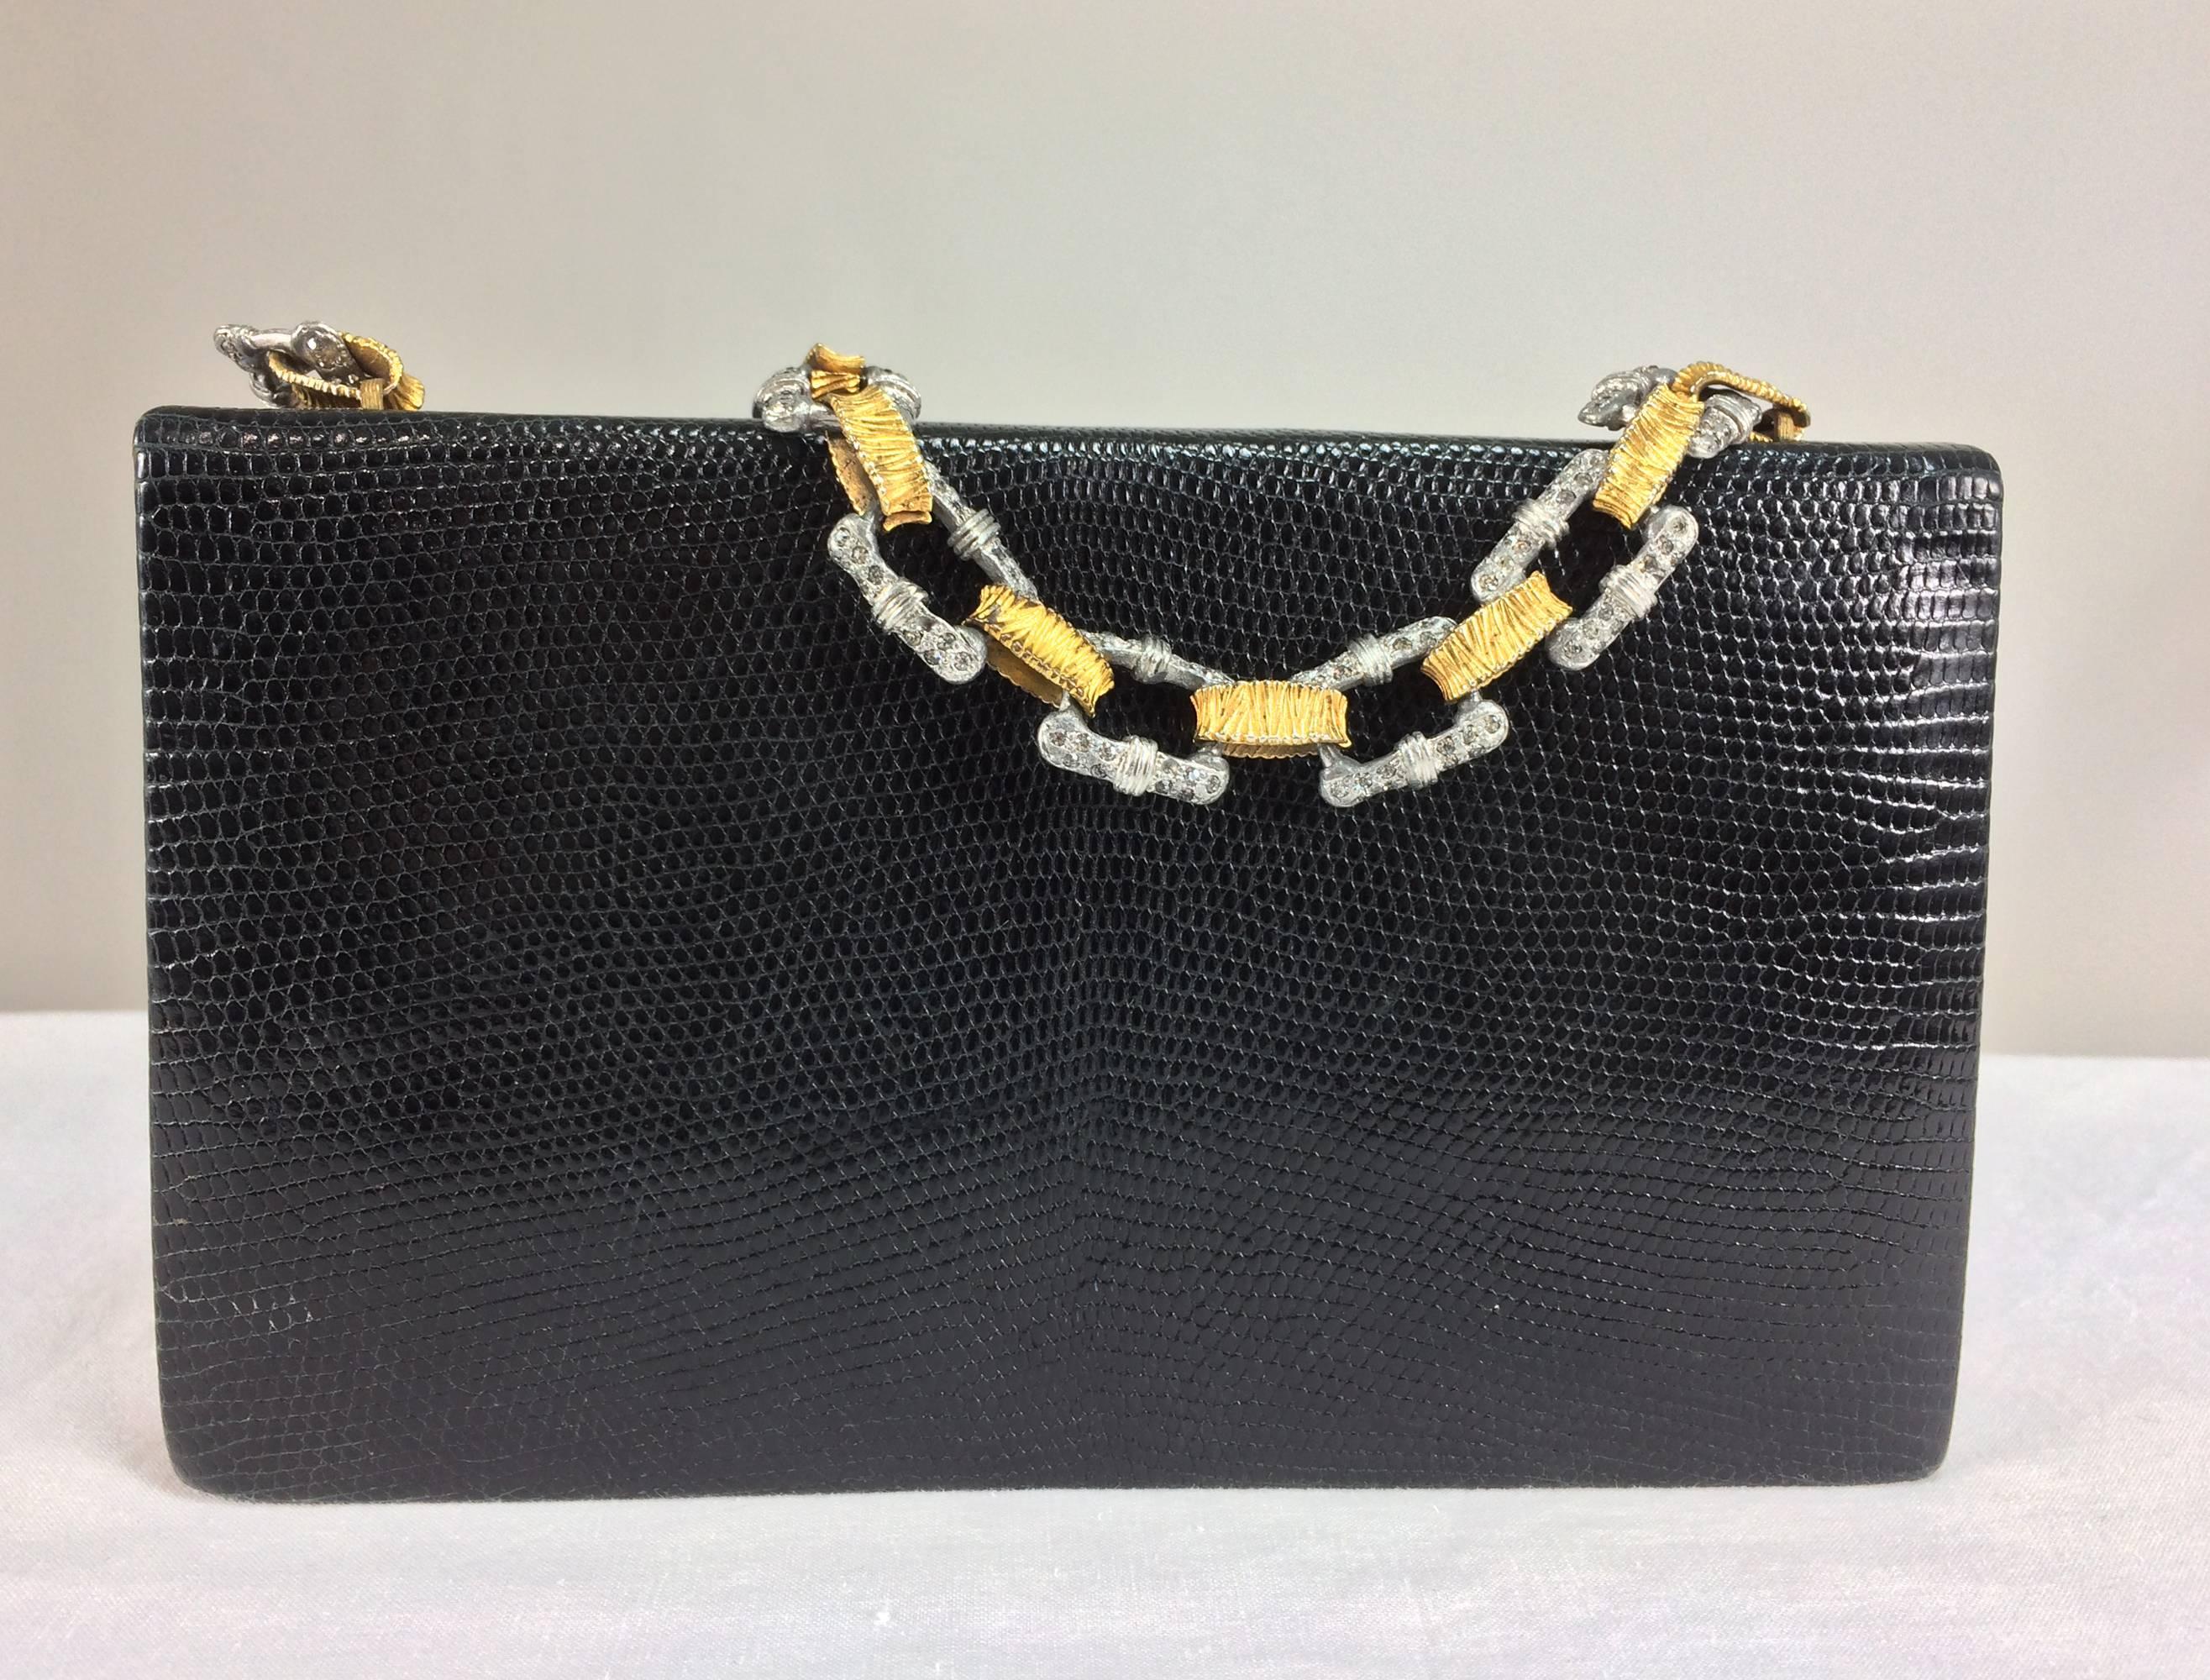 Black Jacomo glazed black lizard evening bag with silver & gold chain handle 1960s